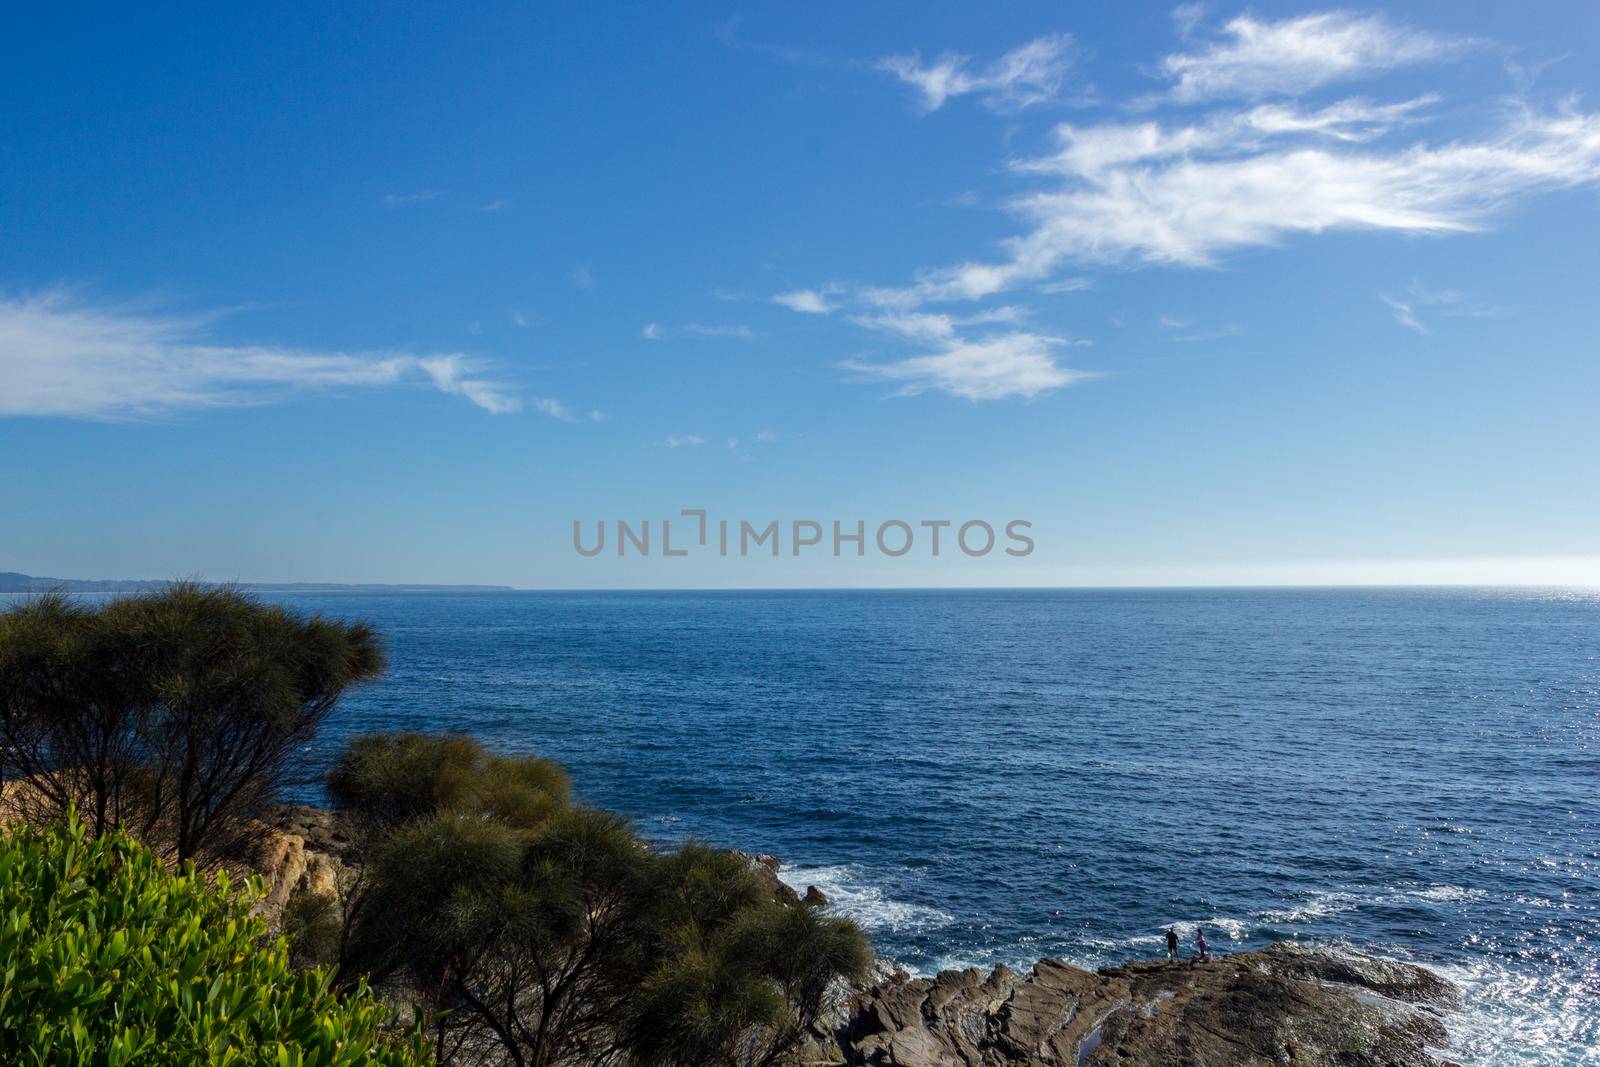 2 People on a Coastline with ocean and rocks, Australia by bettercallcurry